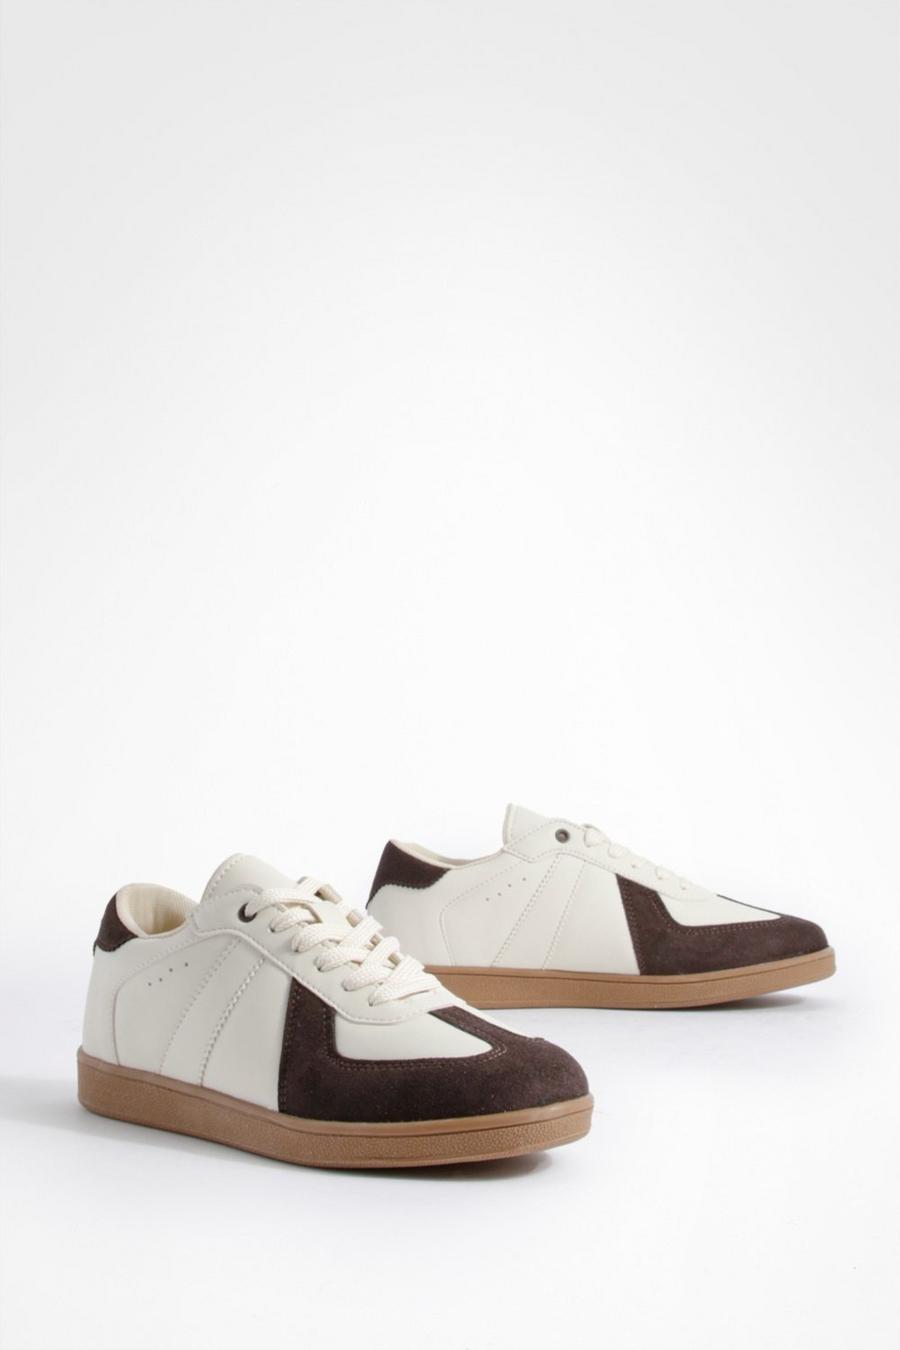 Contrast Panel Gum Sole Flat Sneakers image number 1